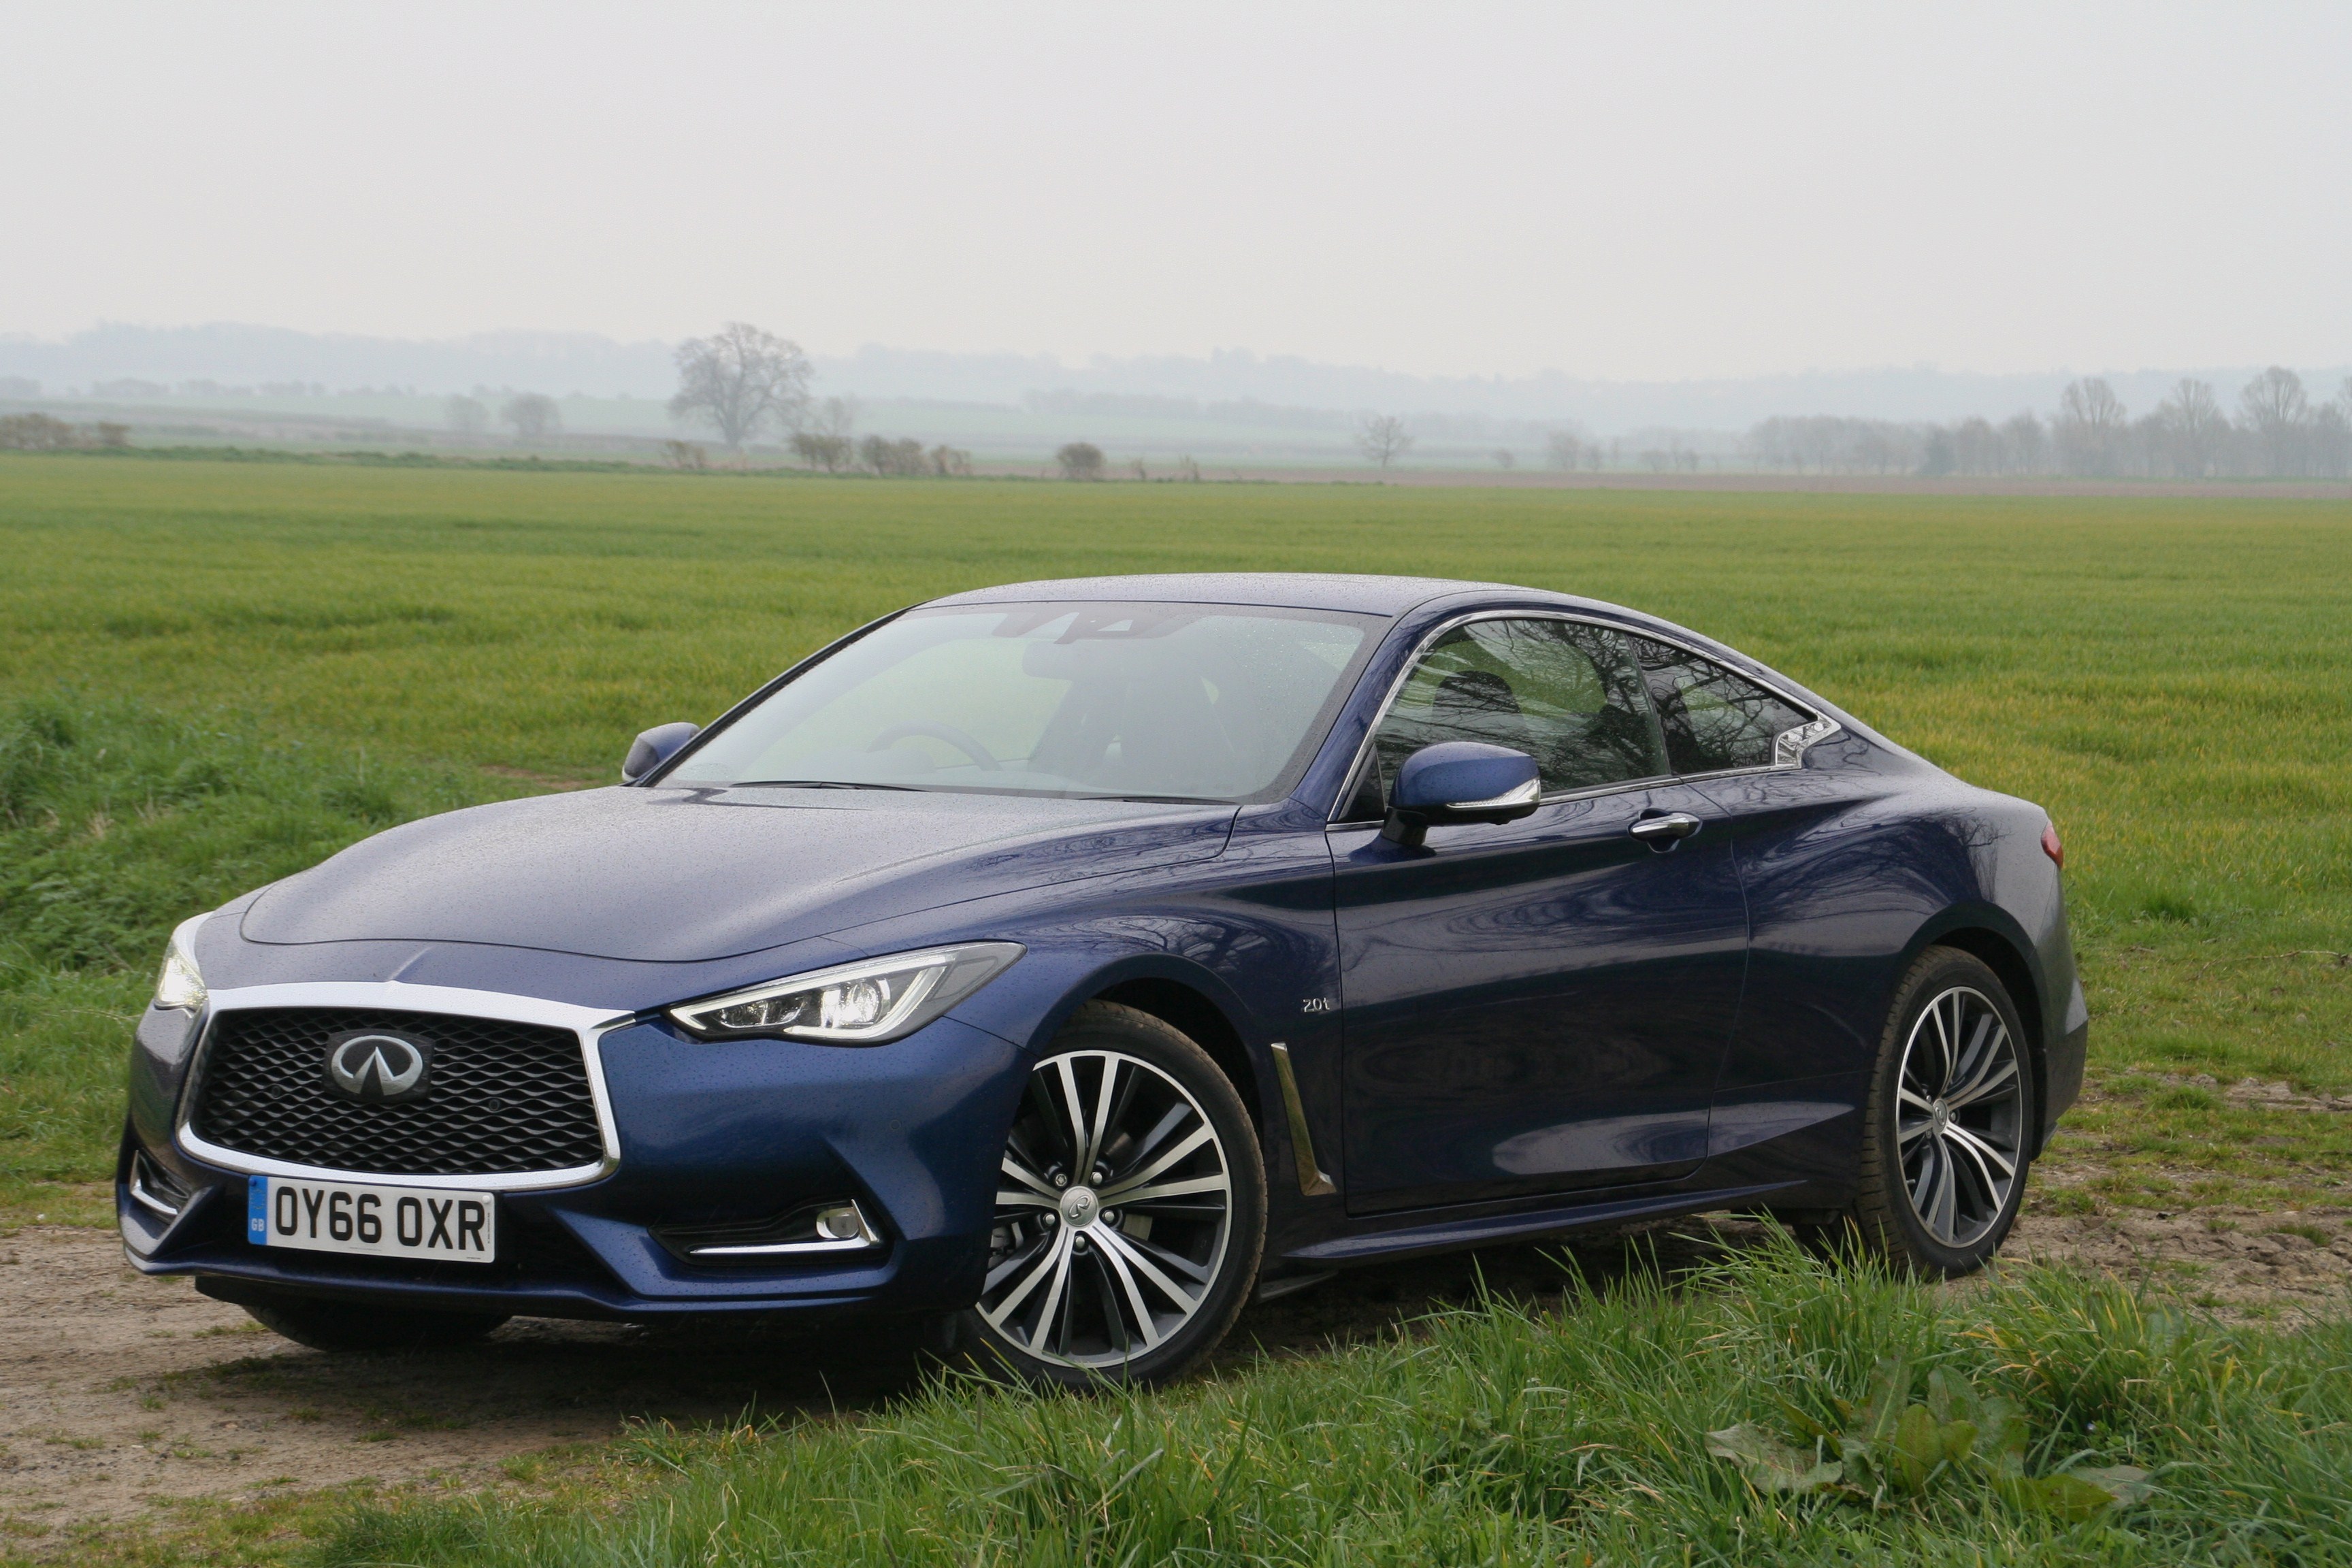 Teutonic engineering is central to the latest Infiniti Q60